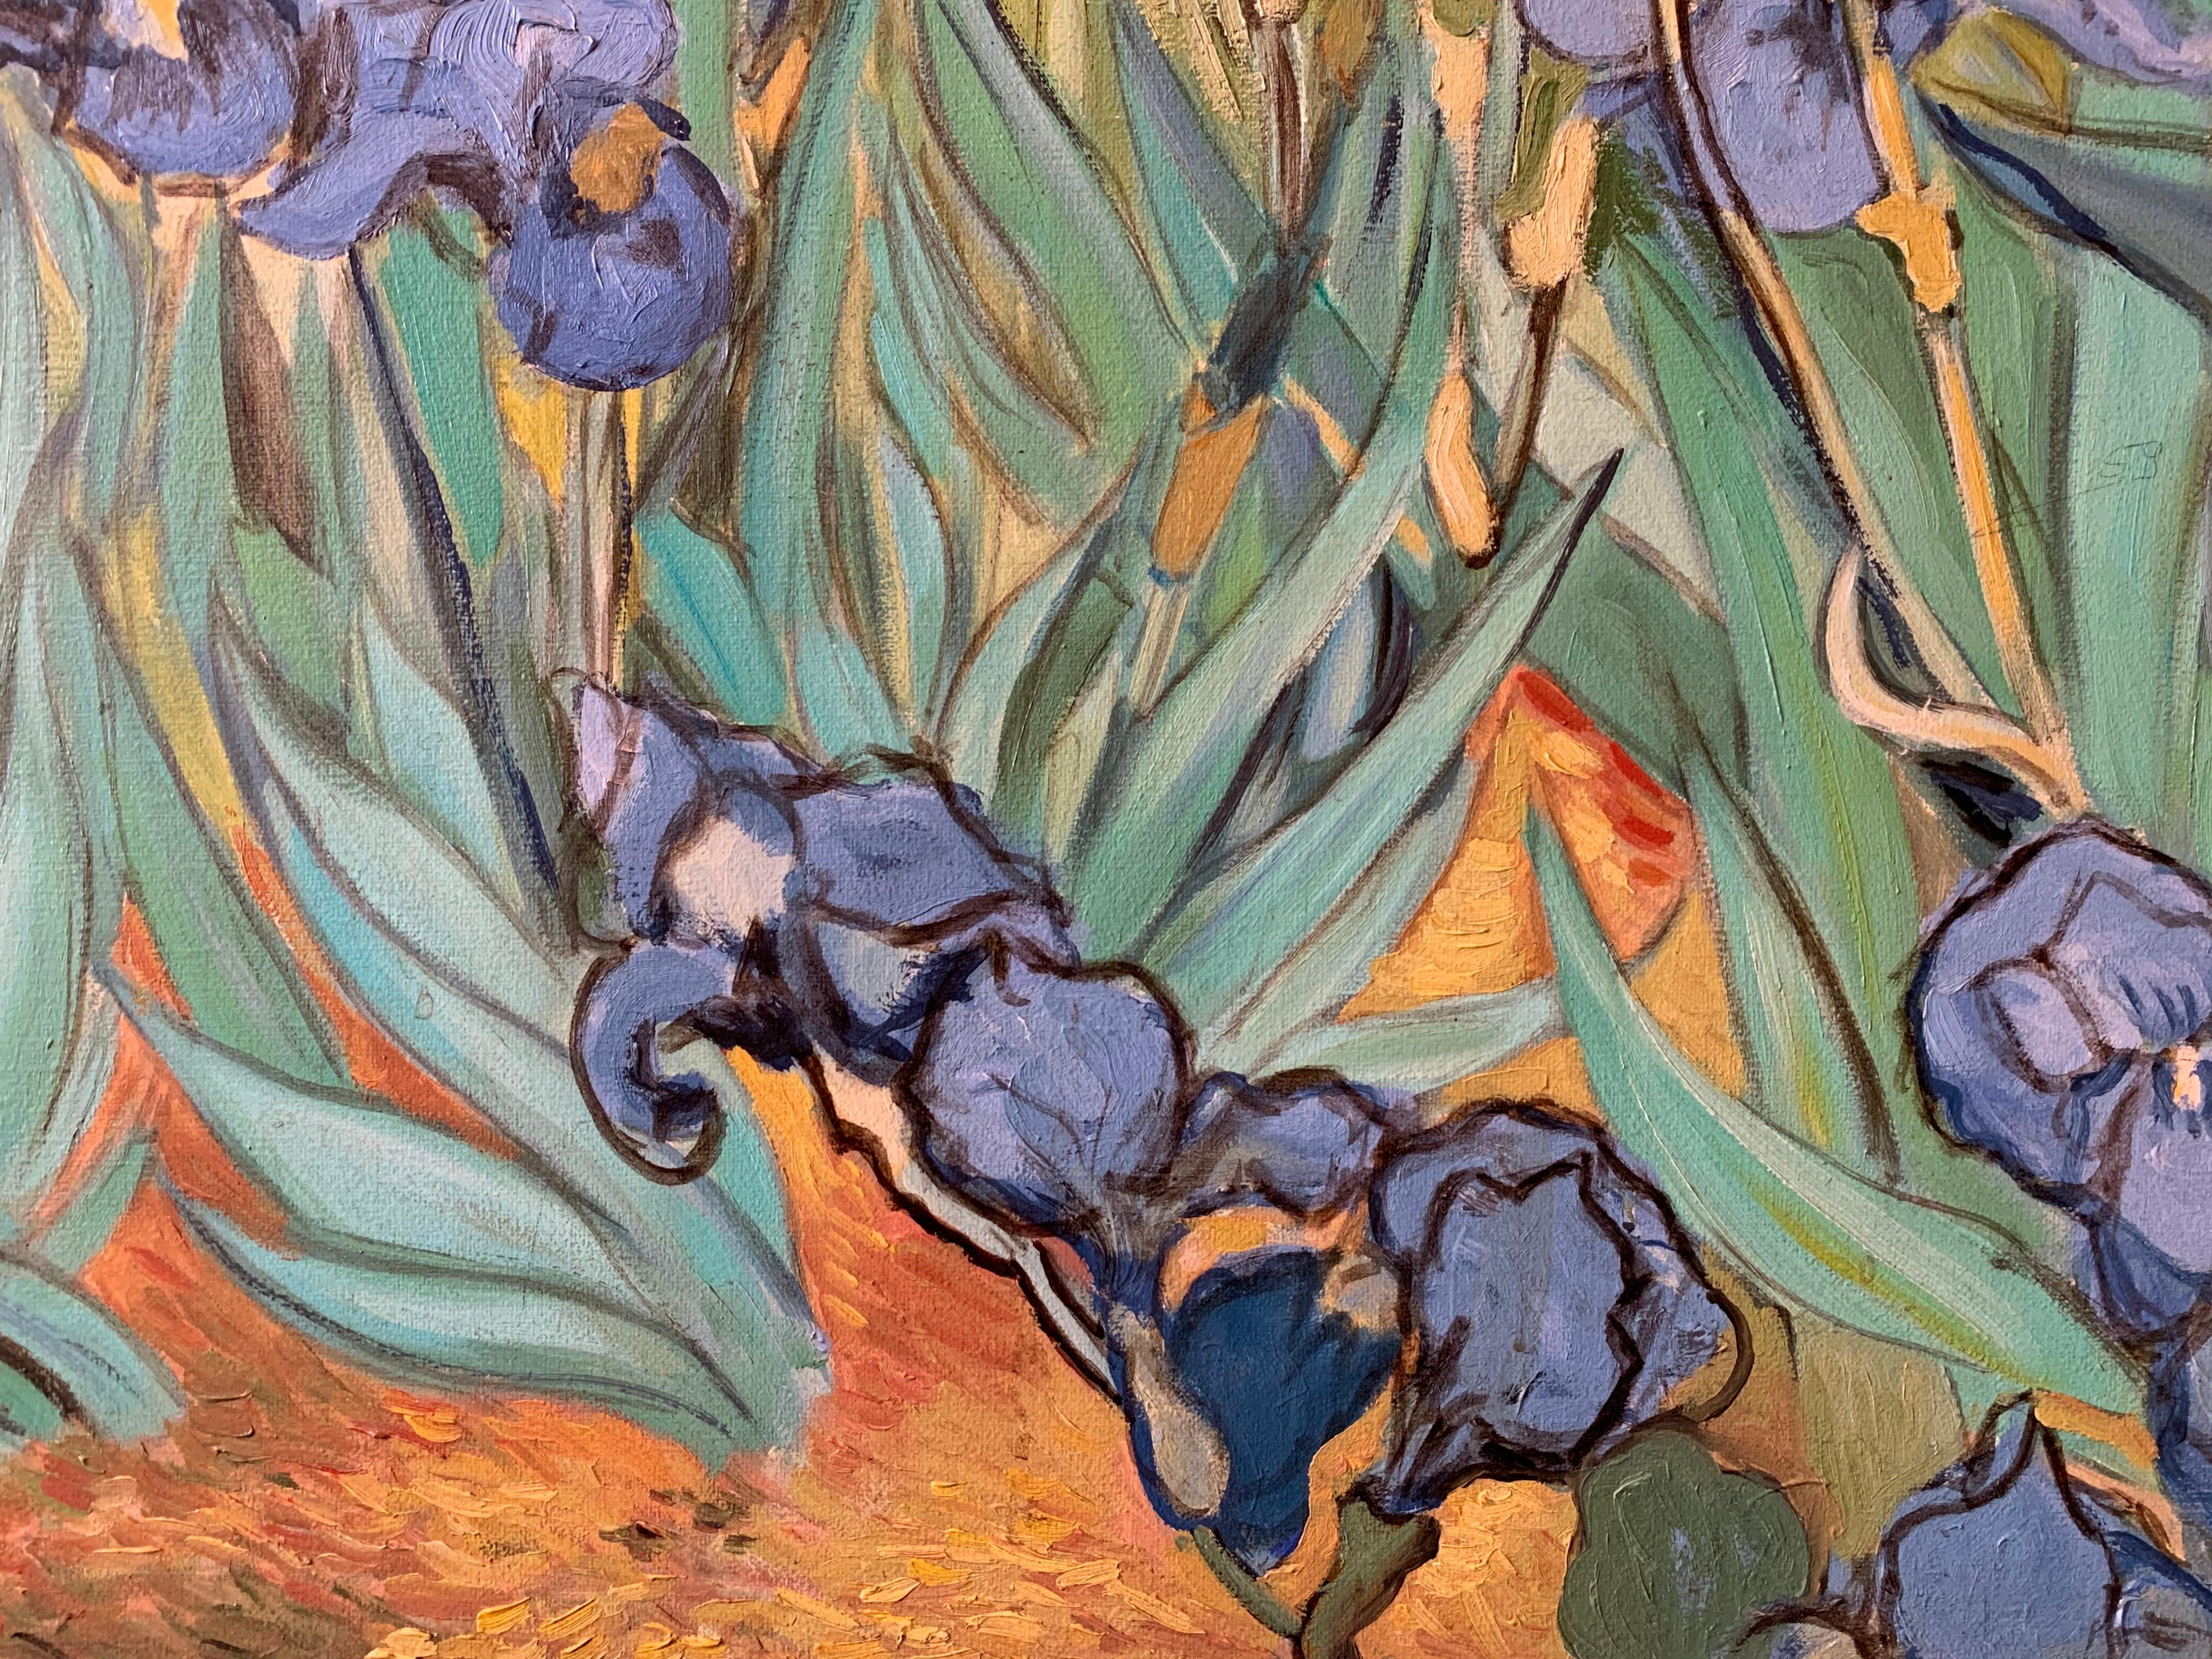 Irises
by Bernard Fournier, French 20th century
after the earlier painting by Vincent van Gogh
oil painting on canvas, framed
framed size: 28.5 x 37 inches

Beautiful large scale oil painting on canvas, copied from the earlier work by Vincent van